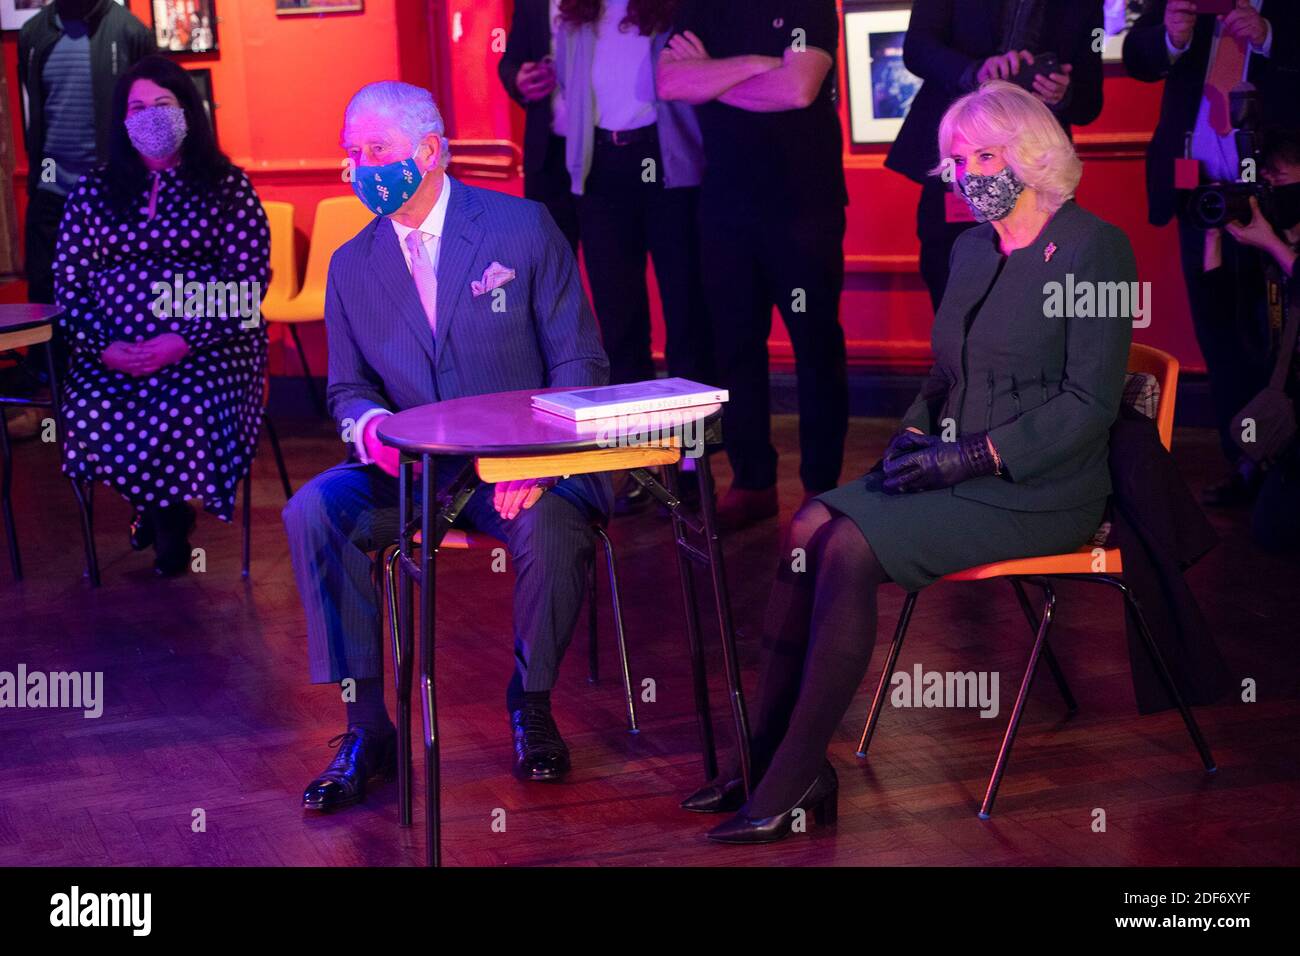 The Prince of Wales and Duchess of Cornwall watching a short musical performance by singer Emily Capell during a visit to the 100 Club nightclub in London. Stock Photo